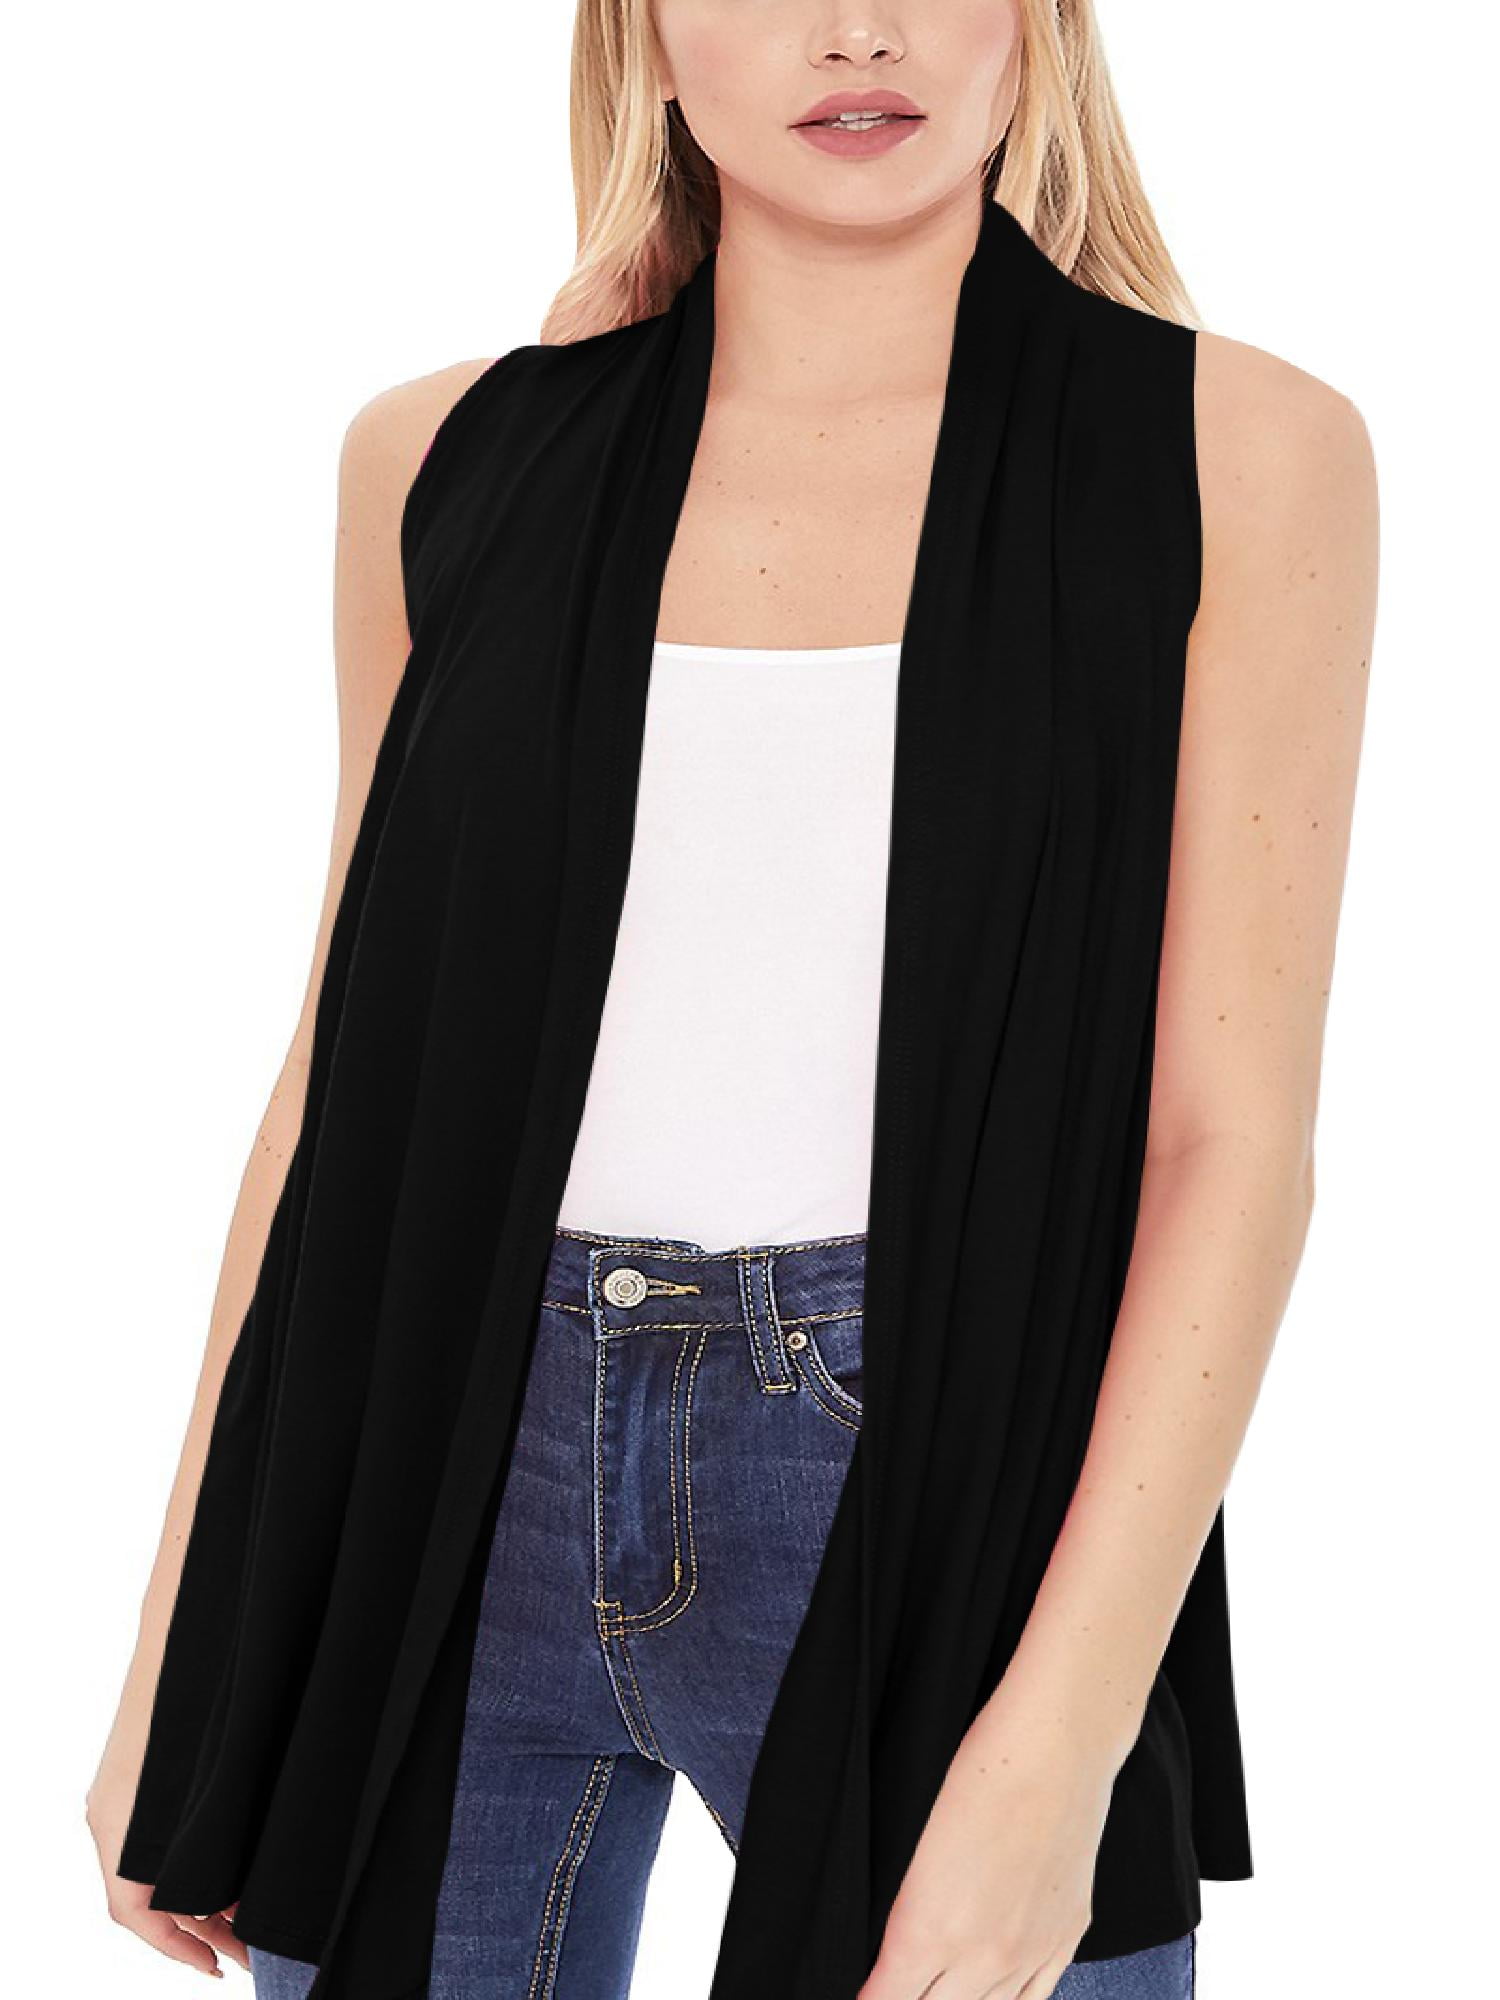 Women's Sleeveless Open Draped Front Solid Cardigan Vest S-3XL Made in ...